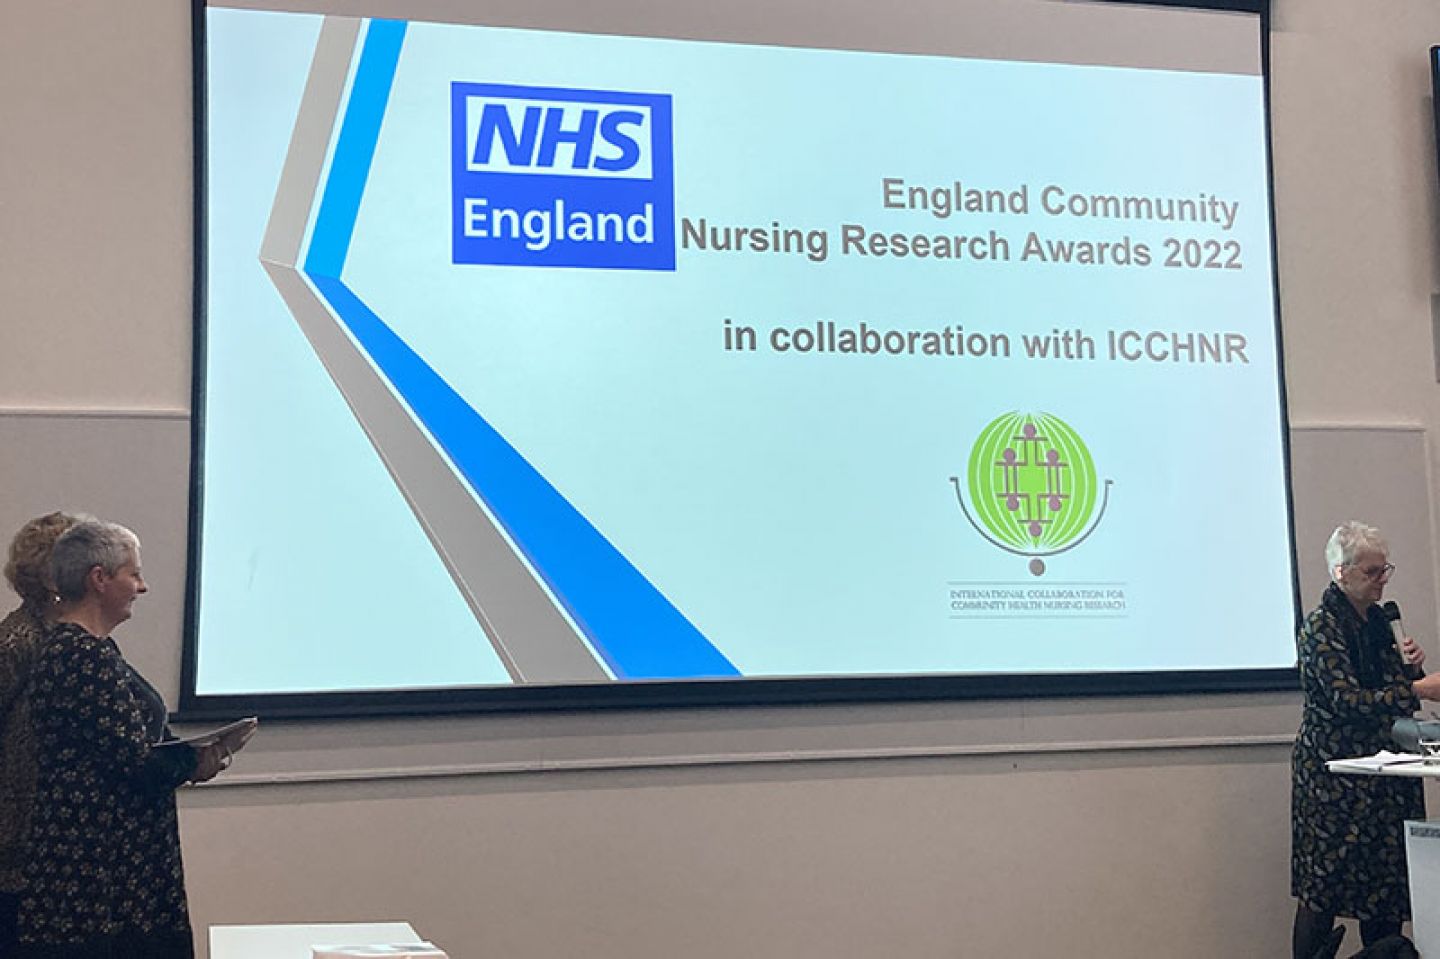 Professor Sally Kendall introducing the NHS England Community Nursing Research Awards